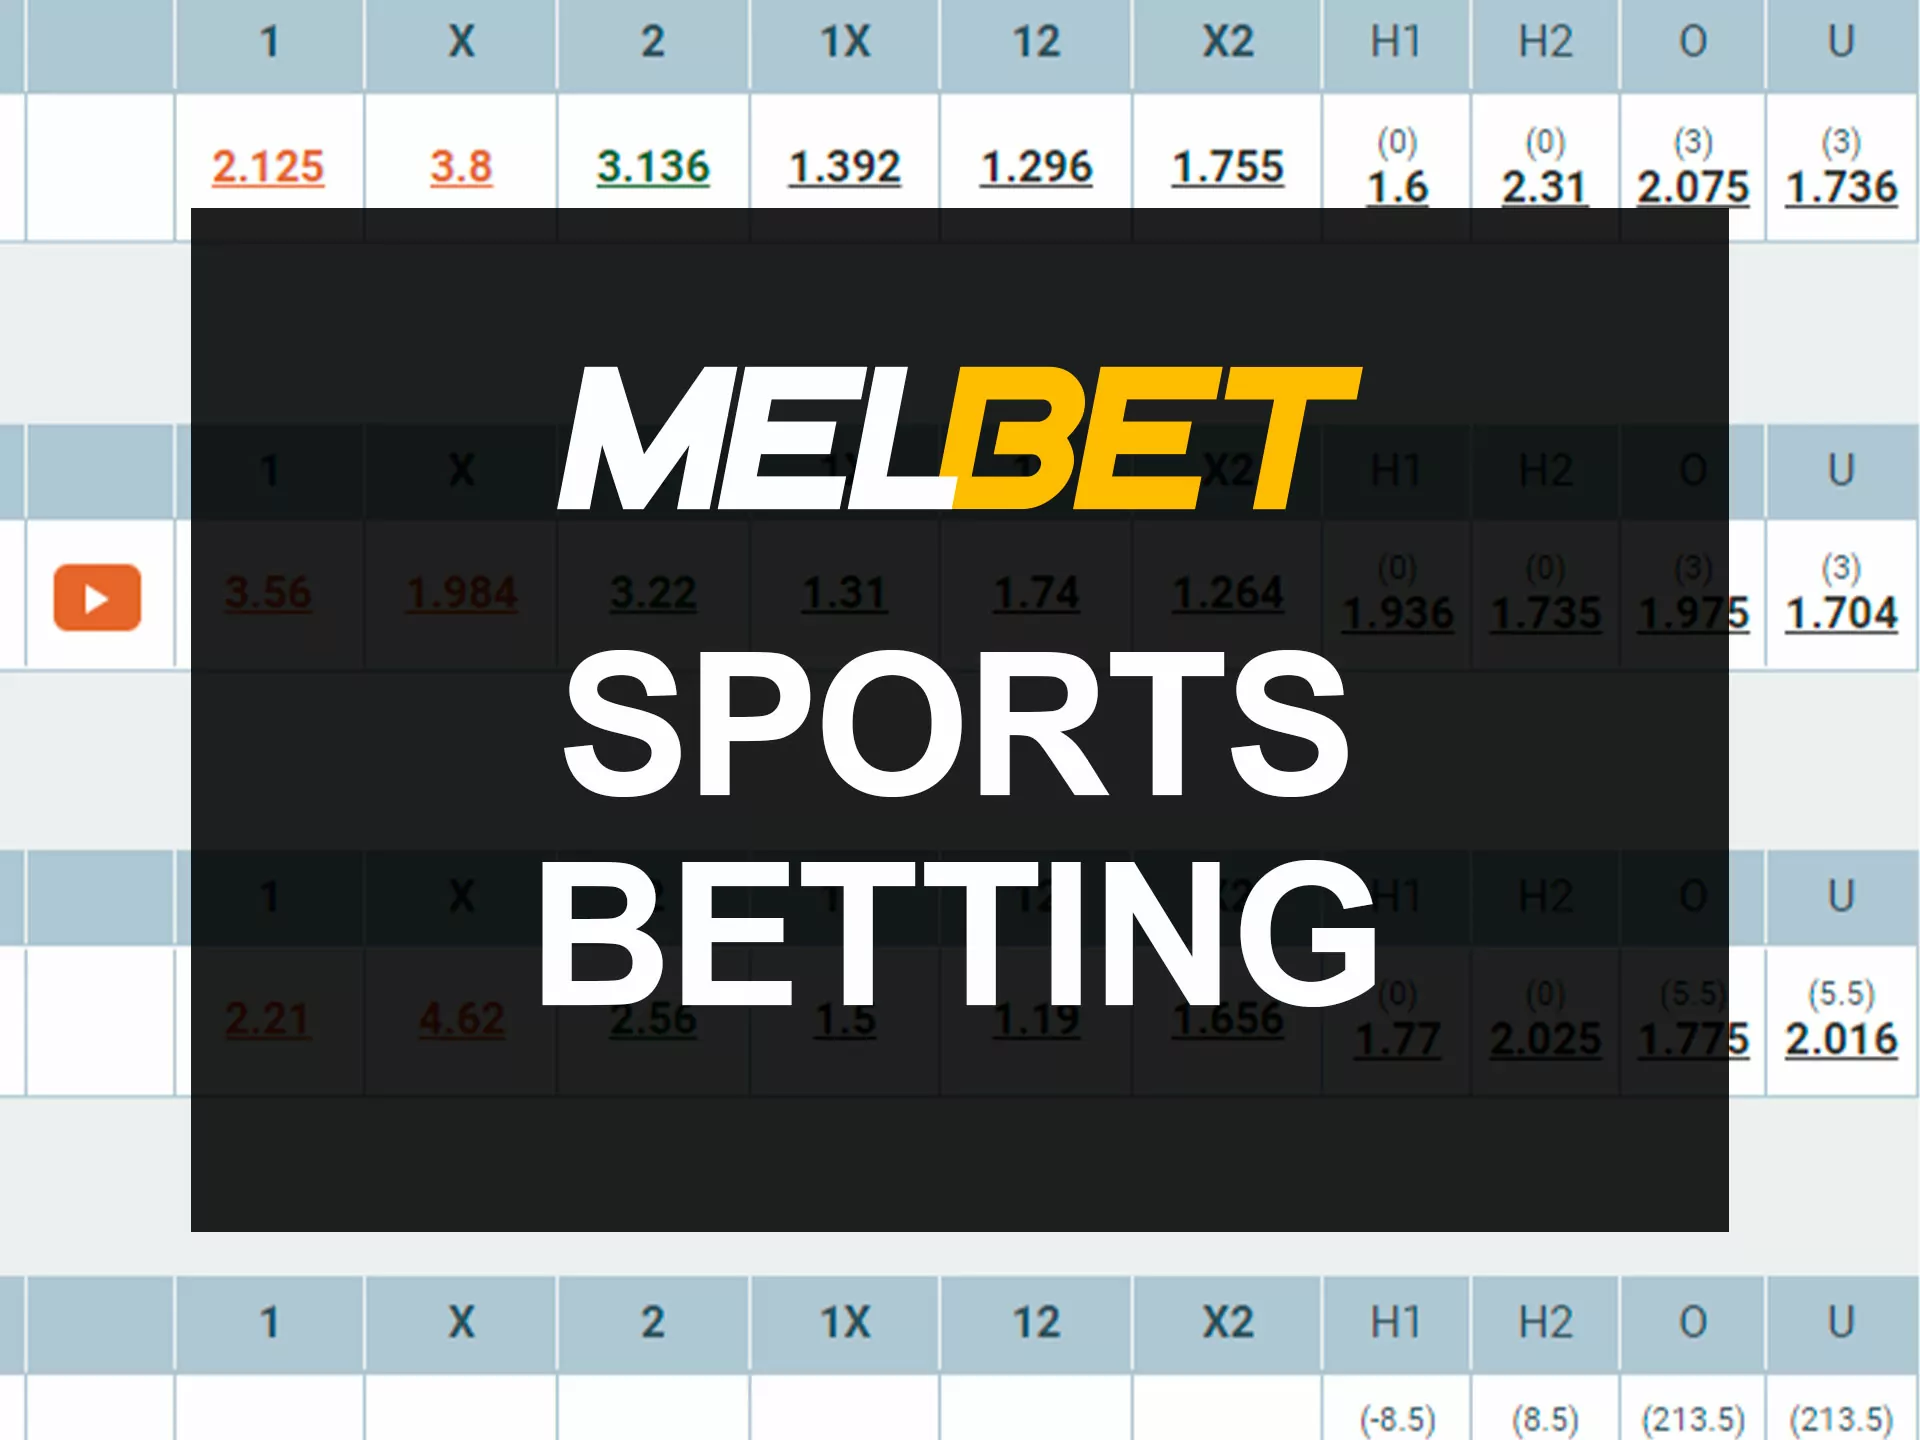 Place bets on sports with profitable odds.